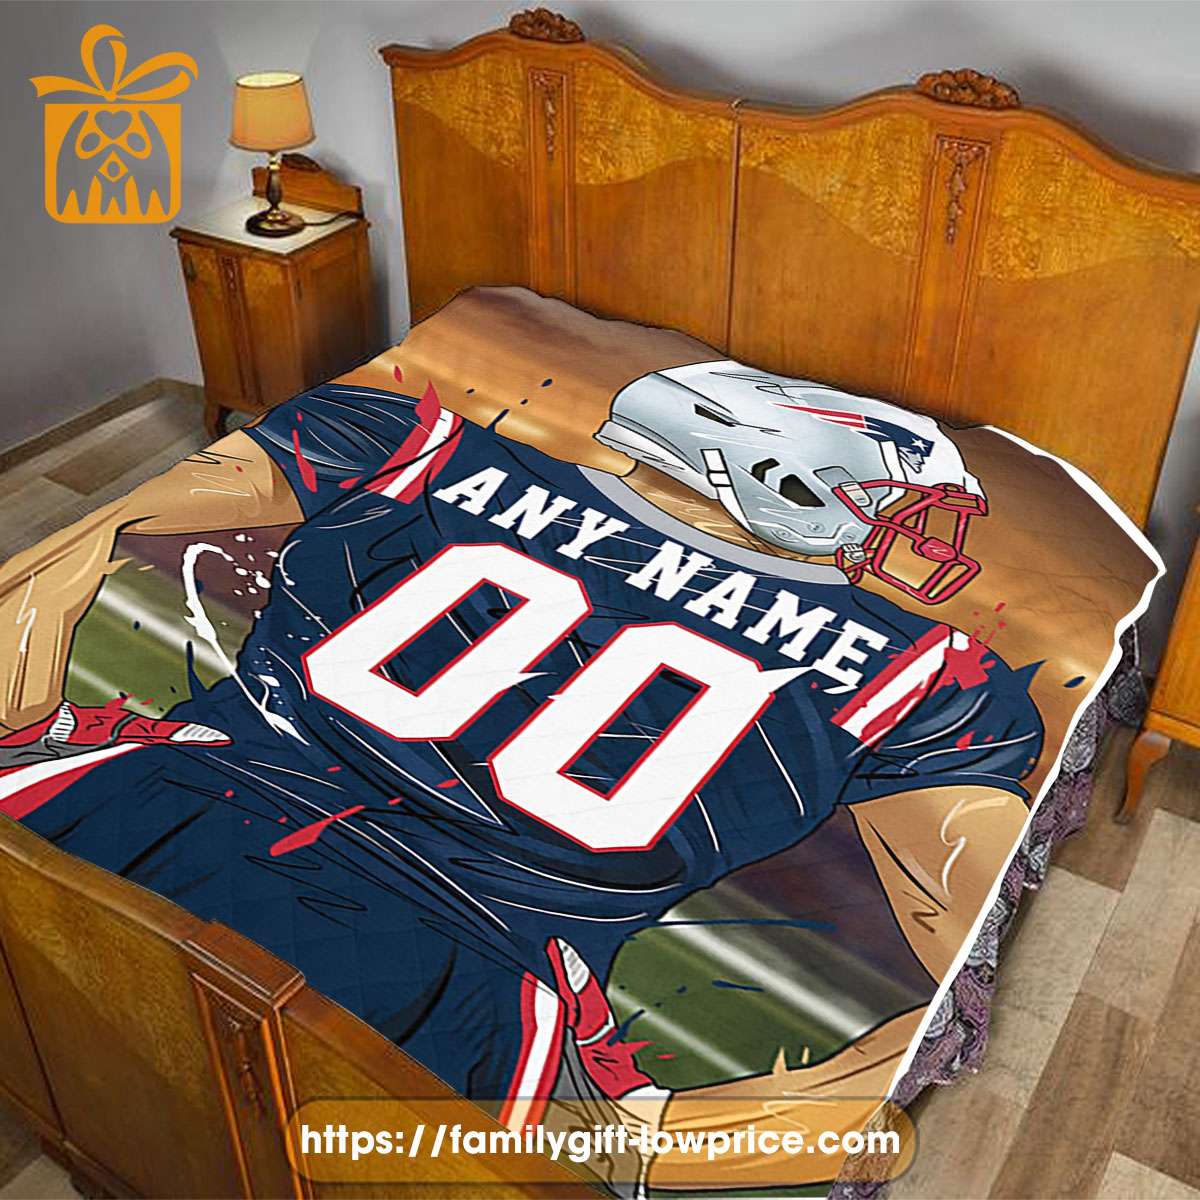 New England Patriots Blanket - Personalized NFL Blanket with Custom Name & Number | Unique Fan Gift